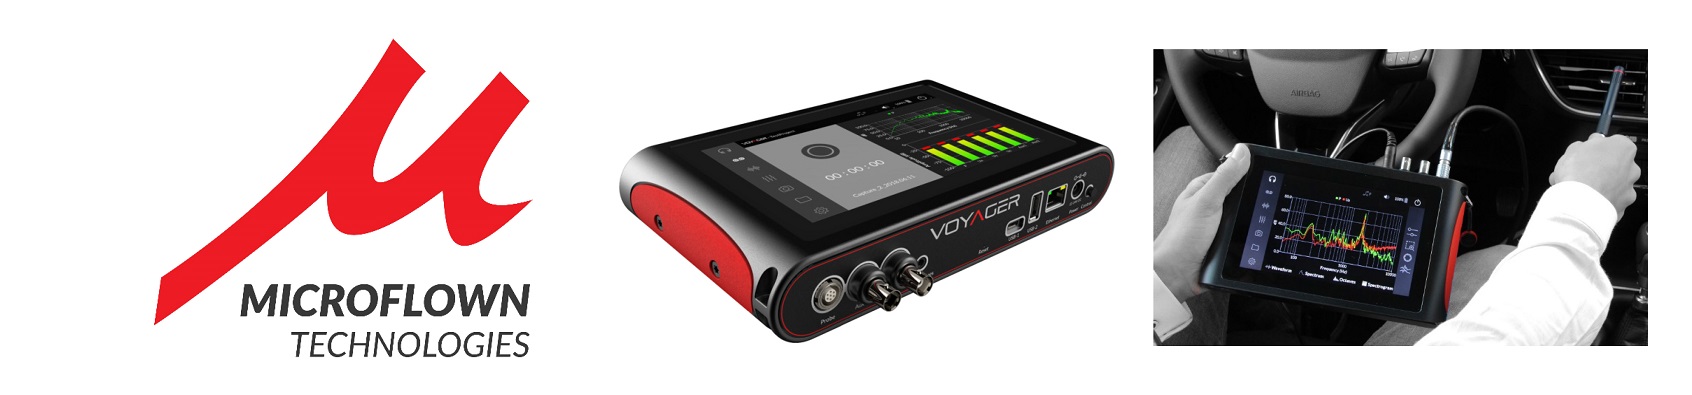 Products - Portable Data Acquisition - Voyager